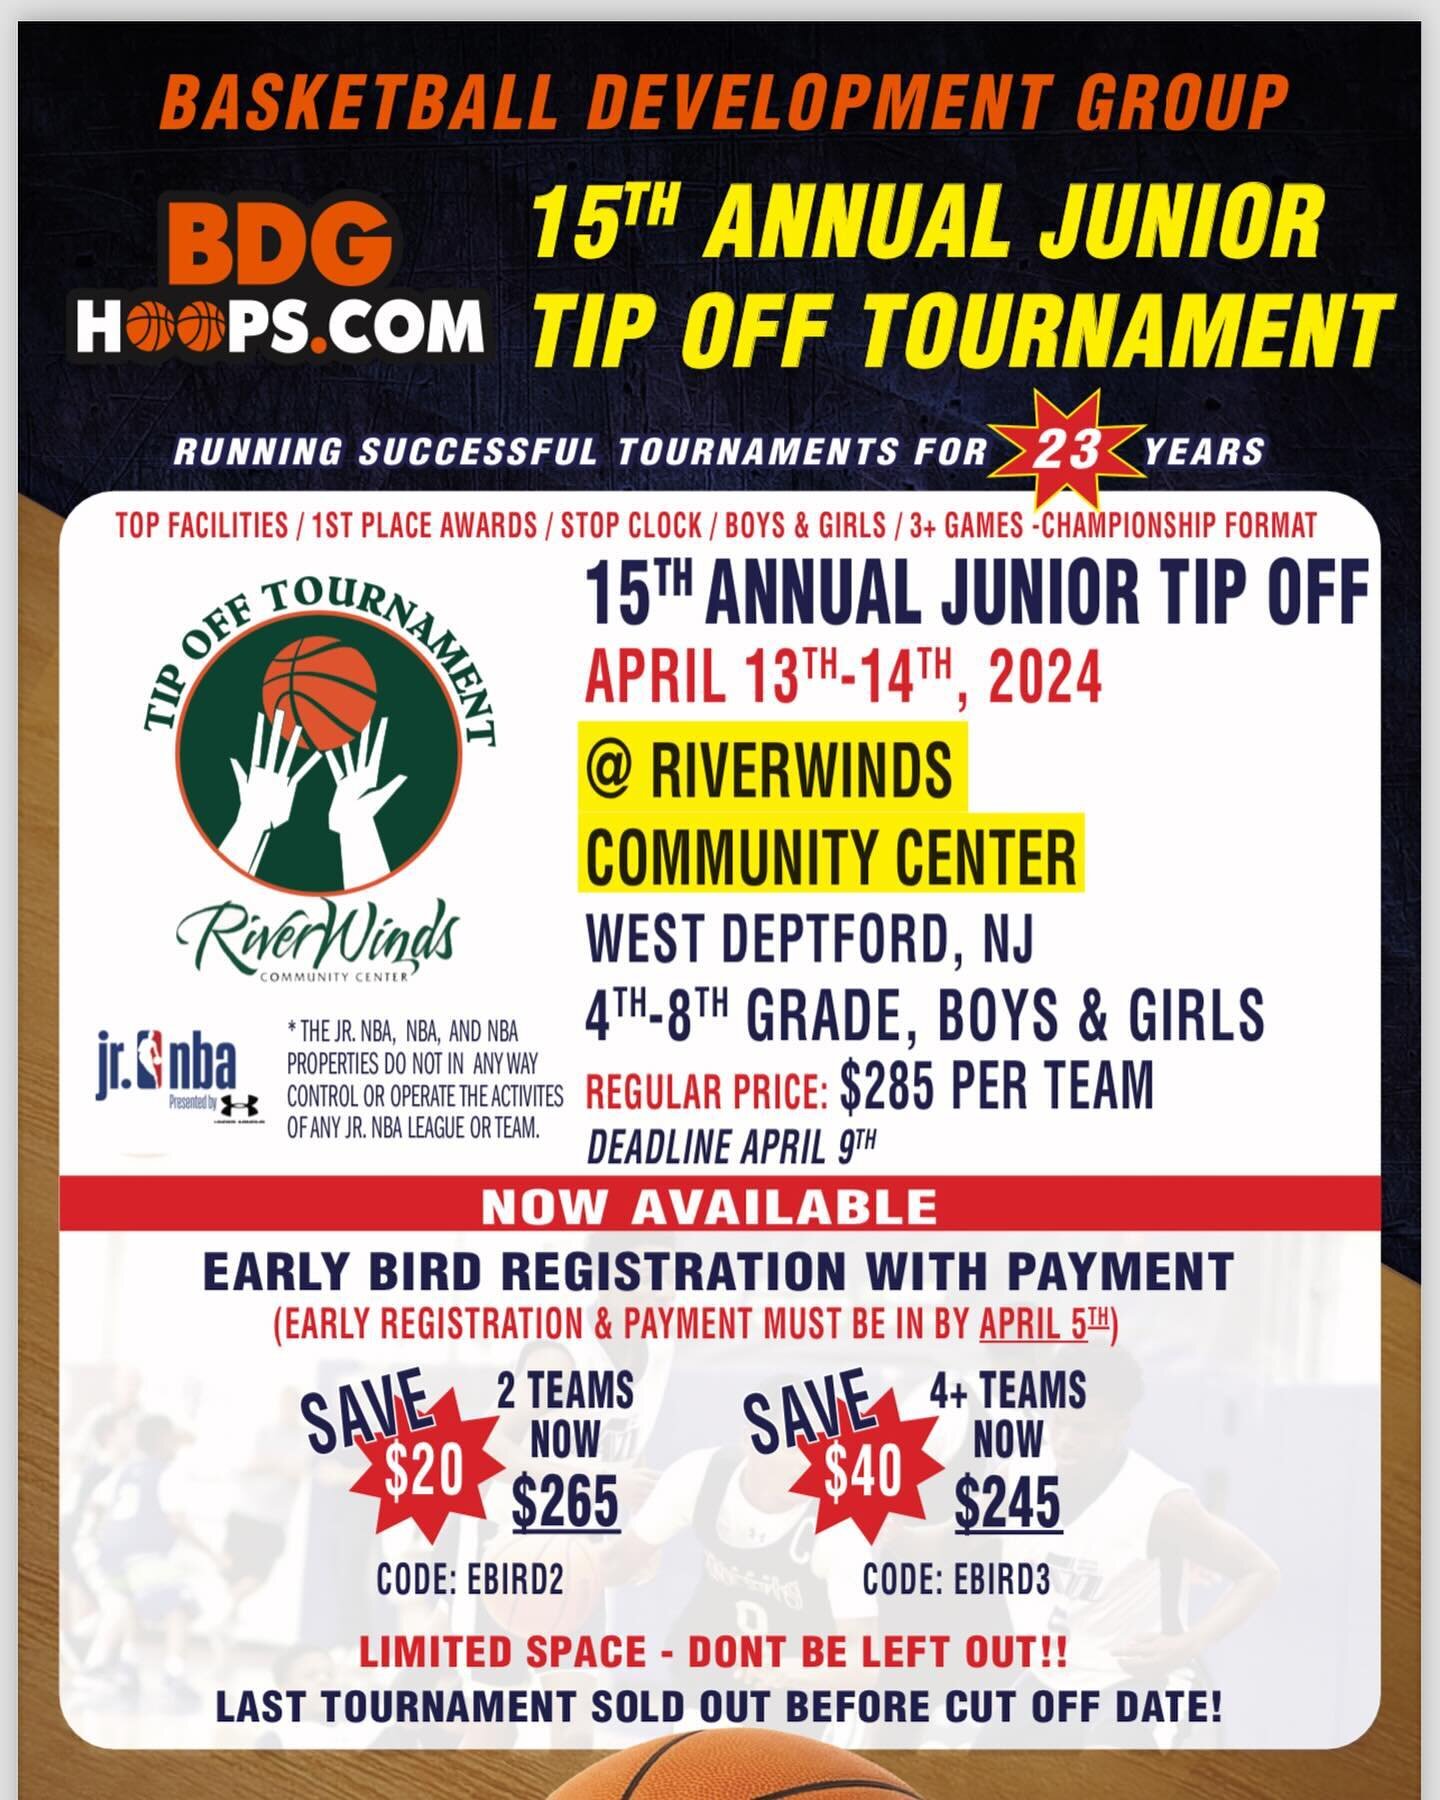 🔥THIS EVENT IS CLOSE TO SELLING OUT AND WE HAVE  GIRLS TEAMS SLOTS STILL AVAILABLE! PLEASE REGISTER NOW AT WWW.BDGHOOPS.COM BEFORE THEY ARE GONE🔥